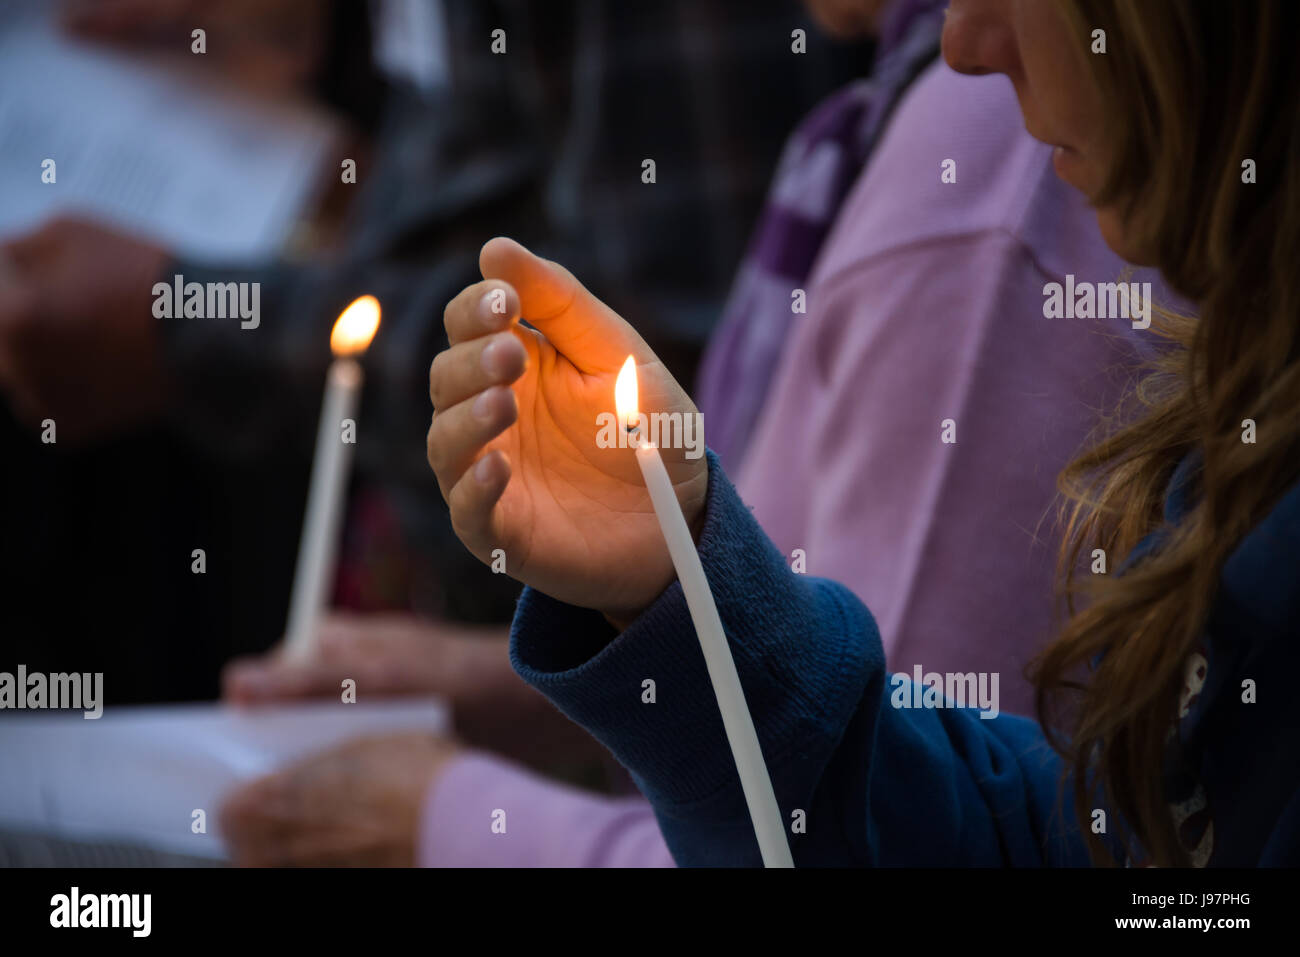 Palestinian and international Christians gather at the Russian Orthodox Church of Mary Magdalene in the Garden of Gethsemane on the Mount of Olives for a candlelight Maundy Thursday prayer service, April 17, 2014. Stock Photo